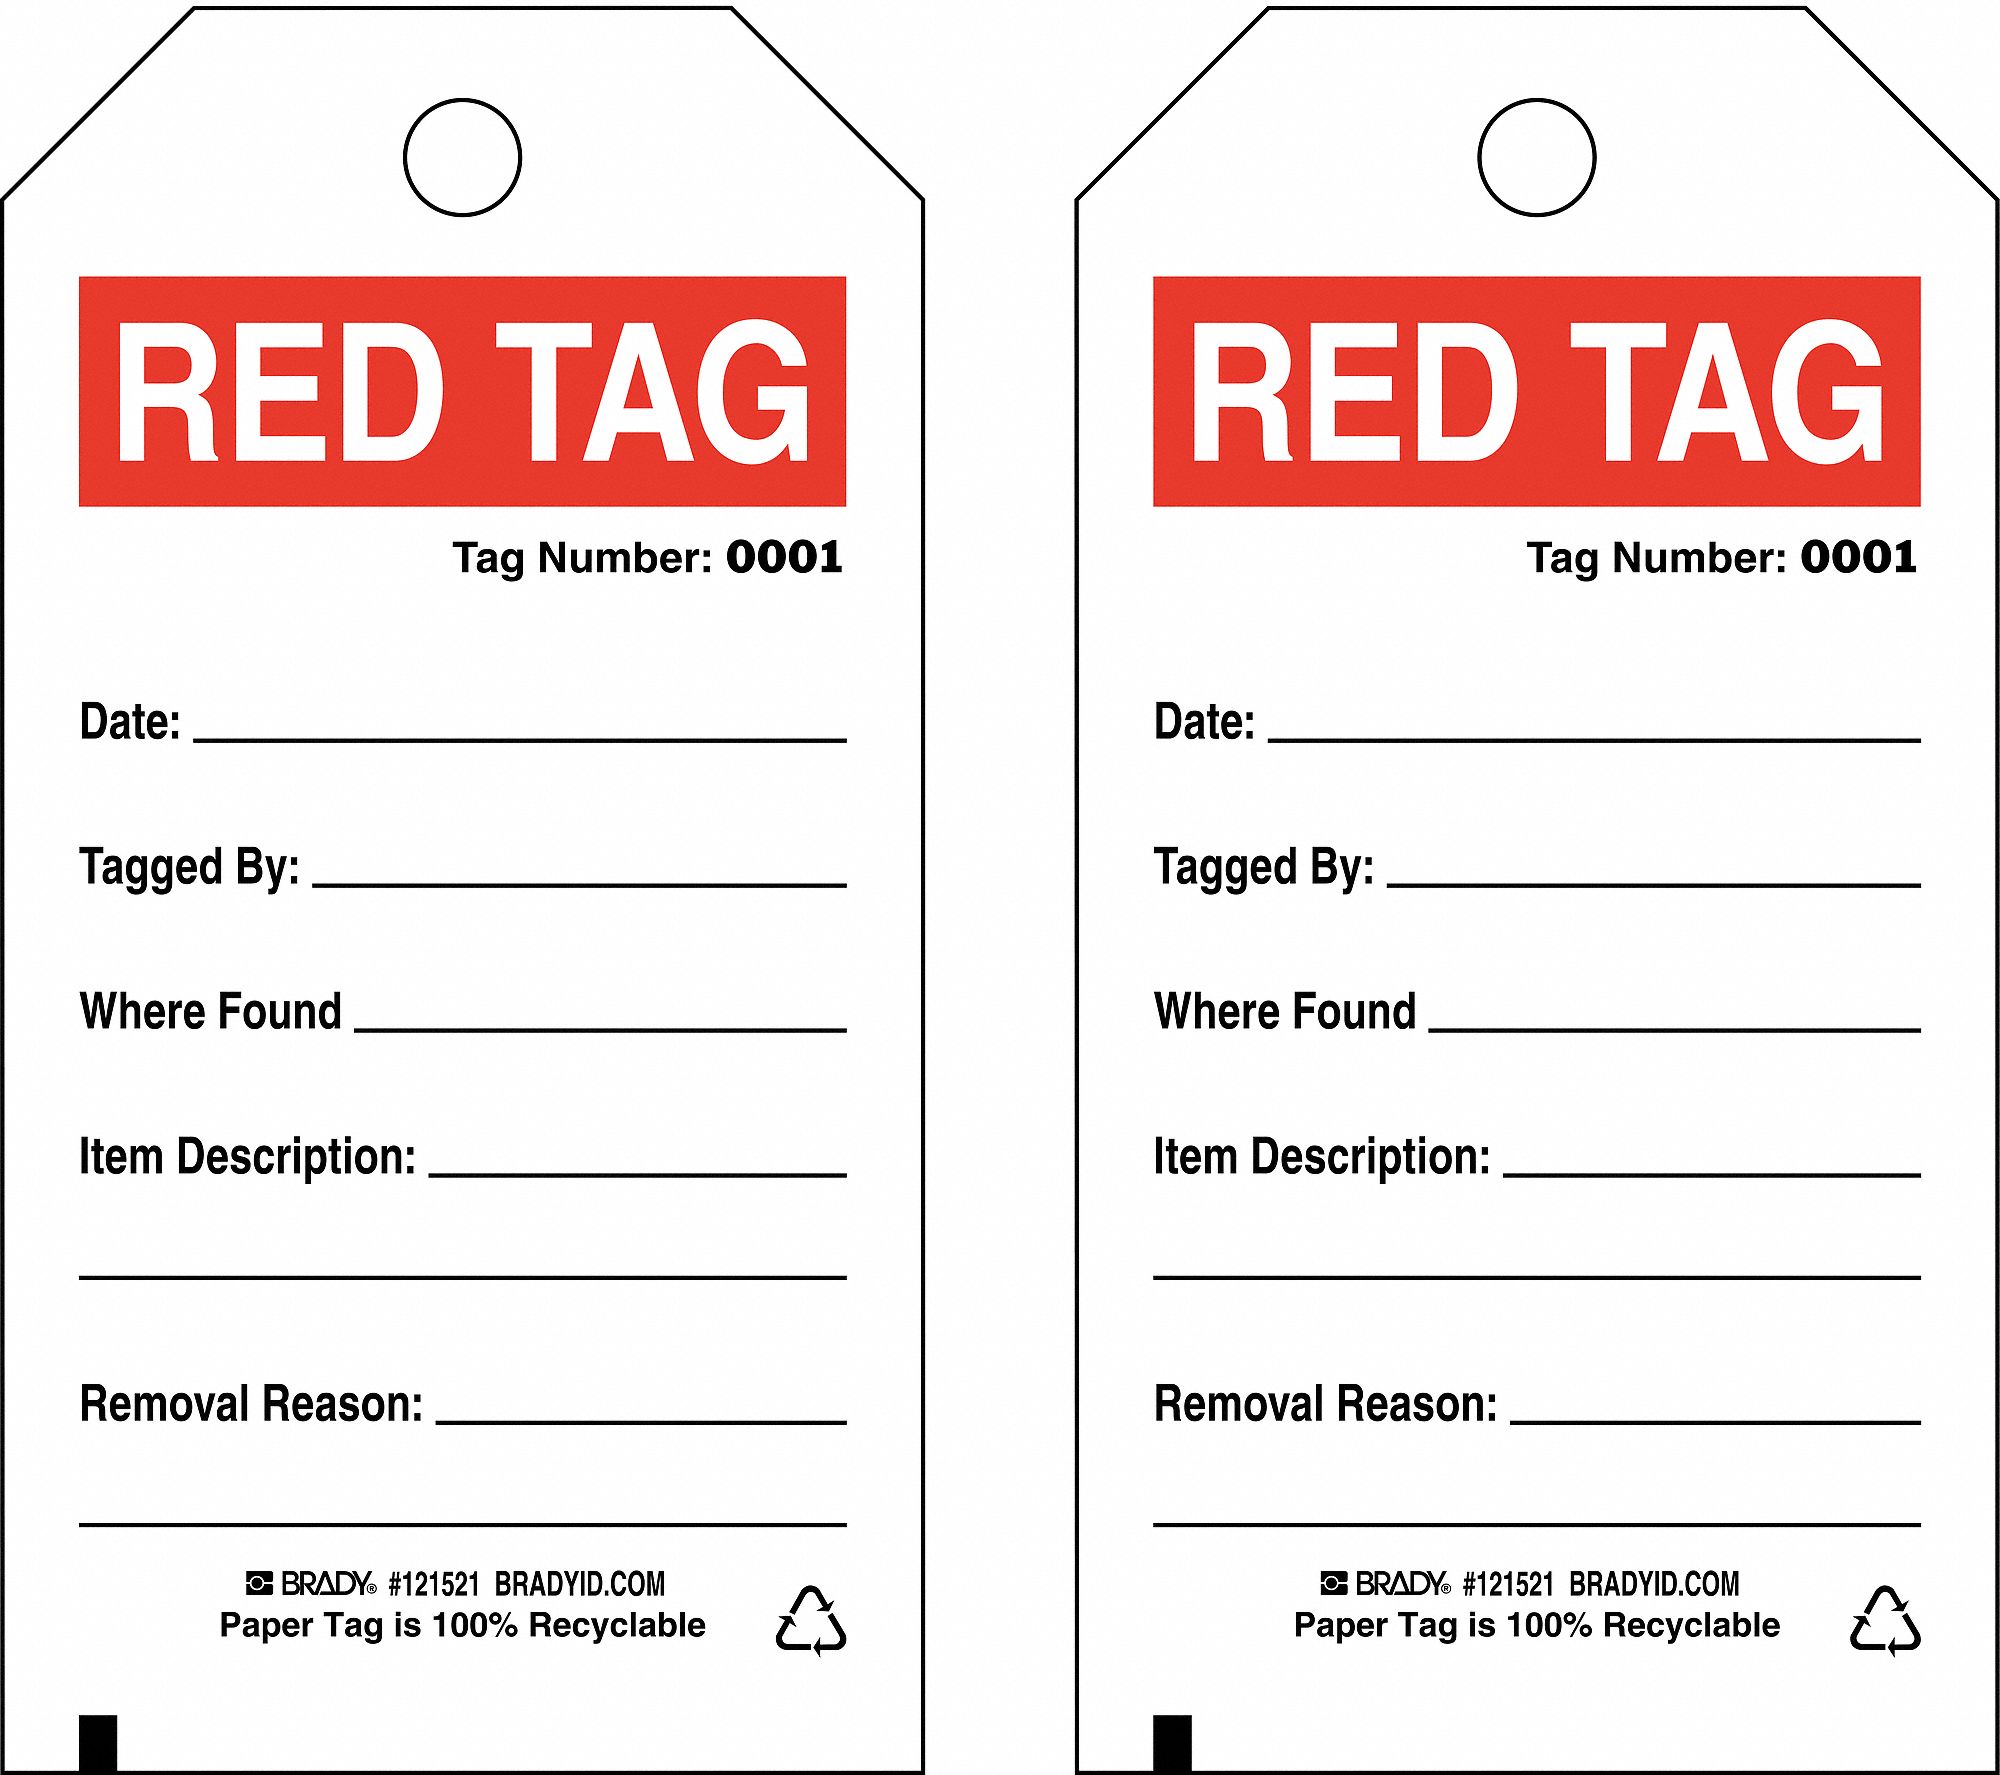 brady-5s-red-tag-sign-legend-date-tagged-by-item-description